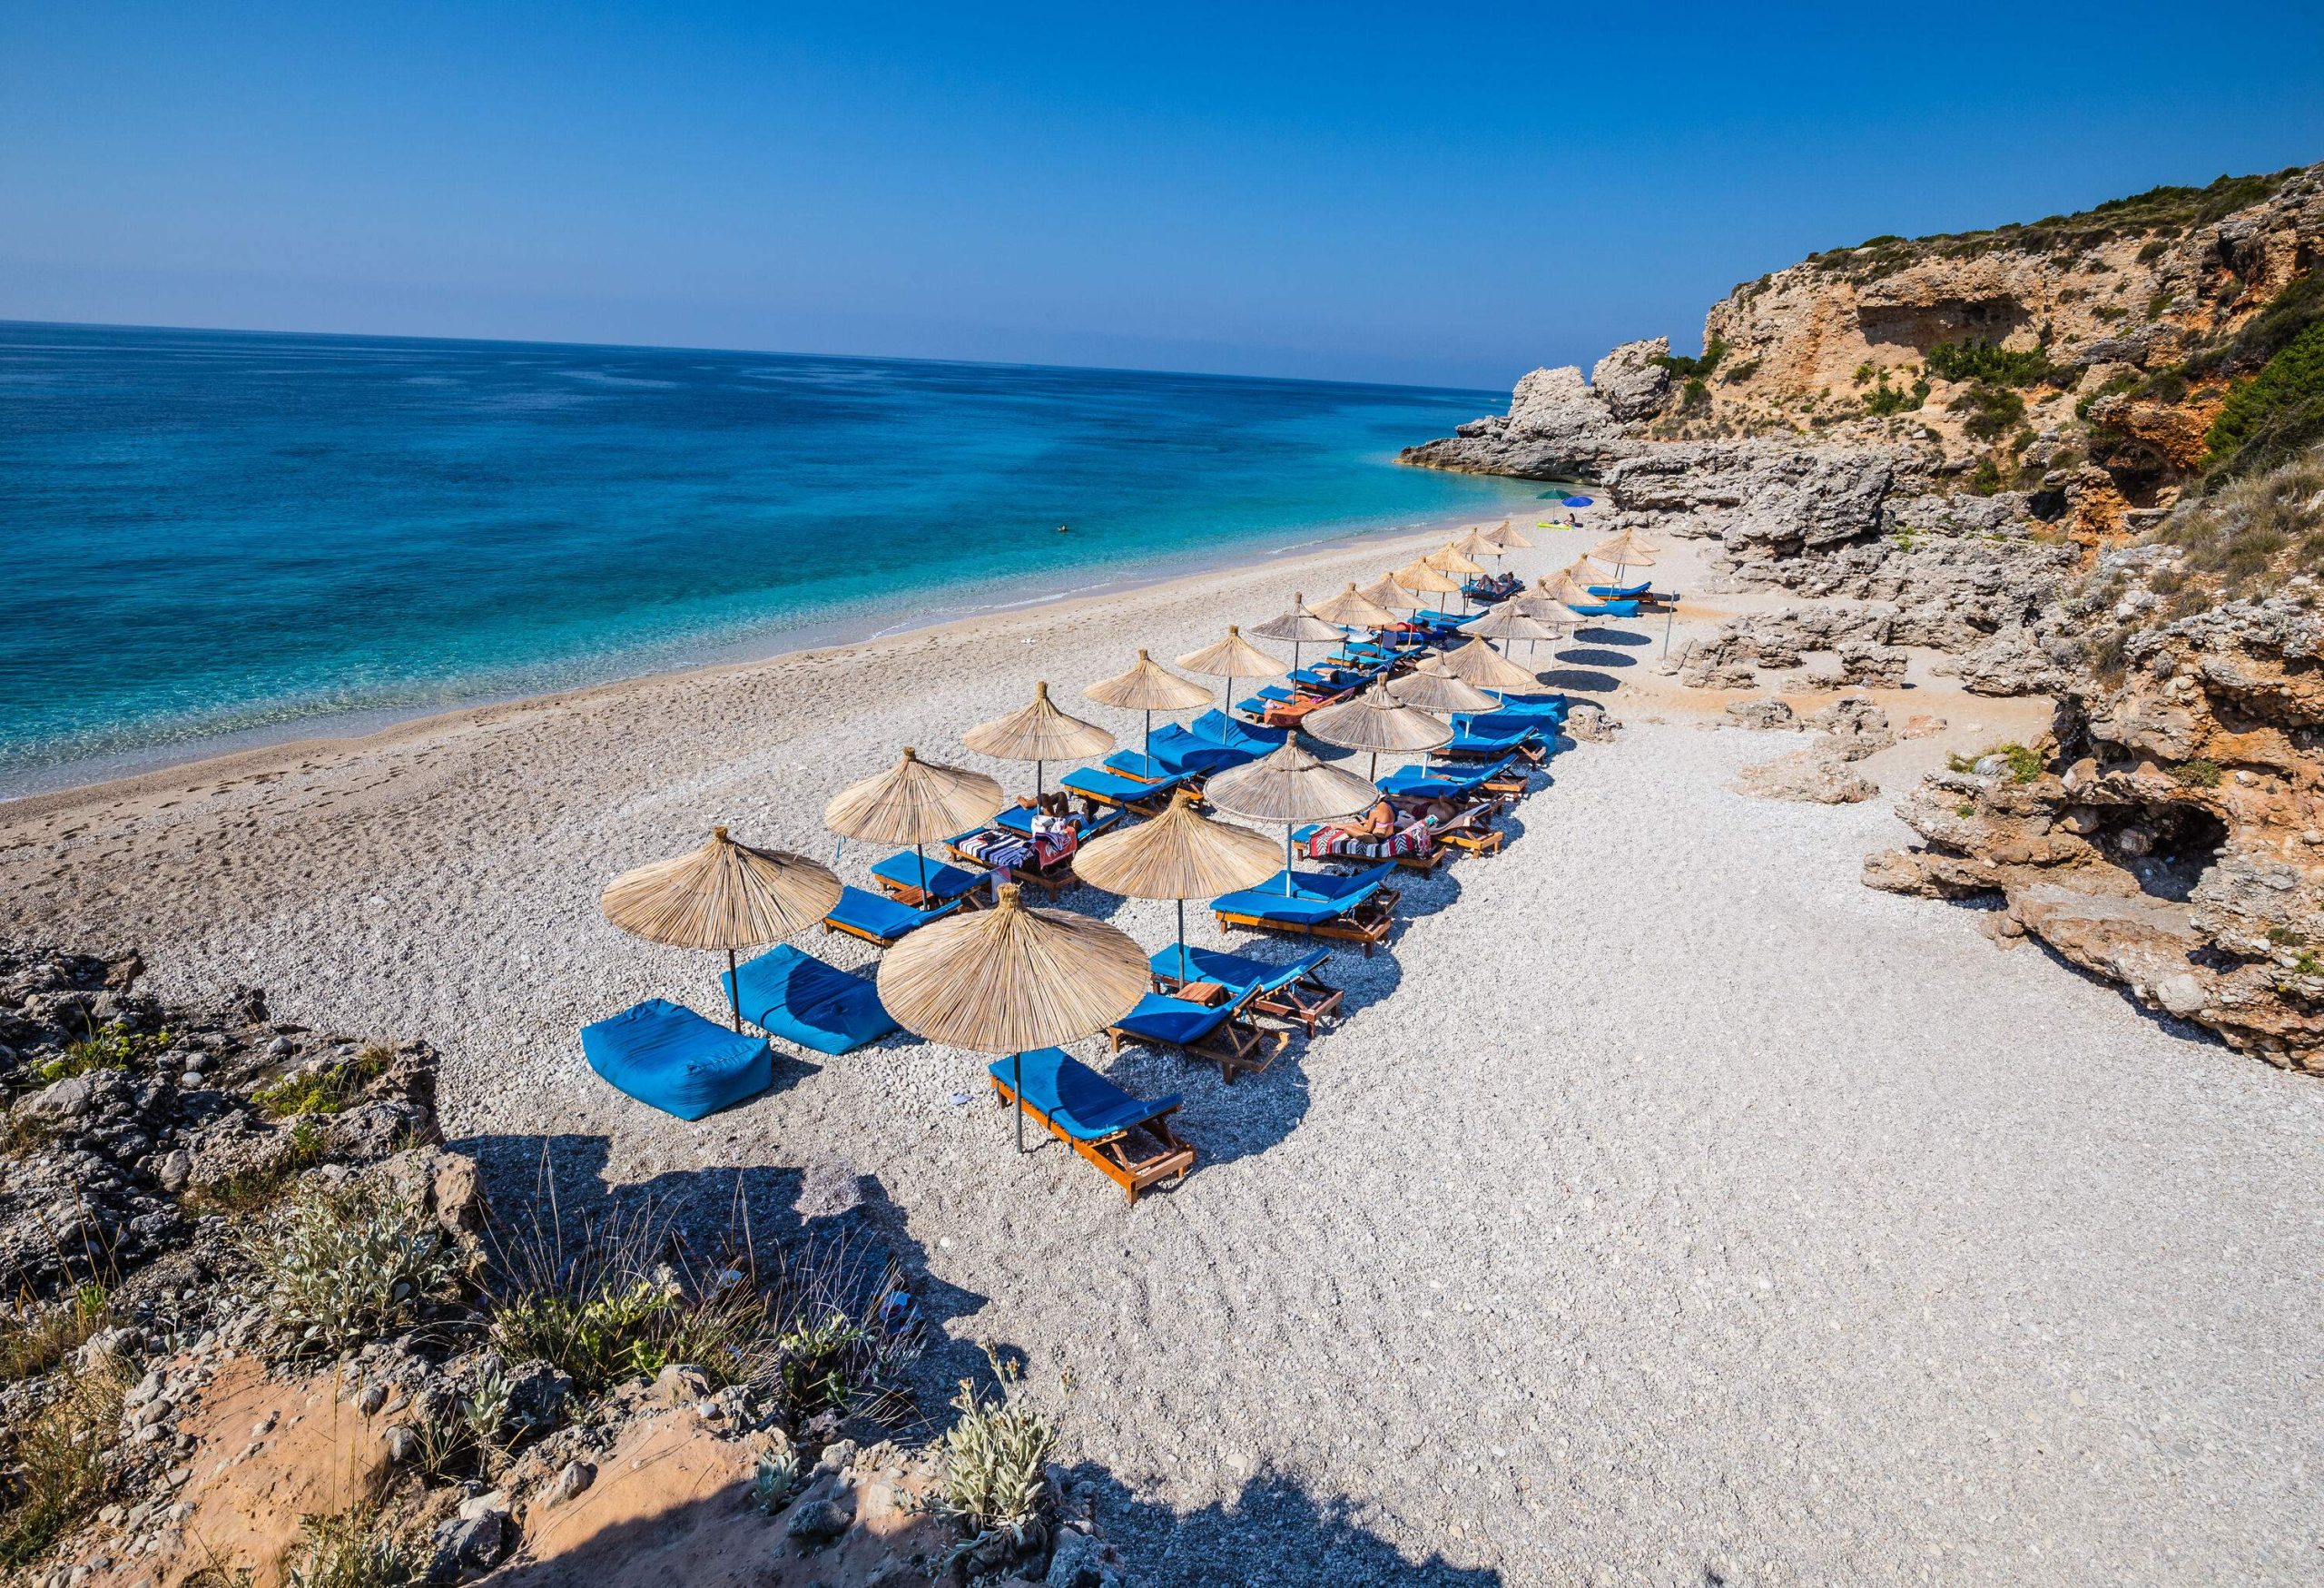 Two rows of parasols and sun loungers line a narrow beach, nestled between the glistening sea and rugged rocky surroundings.